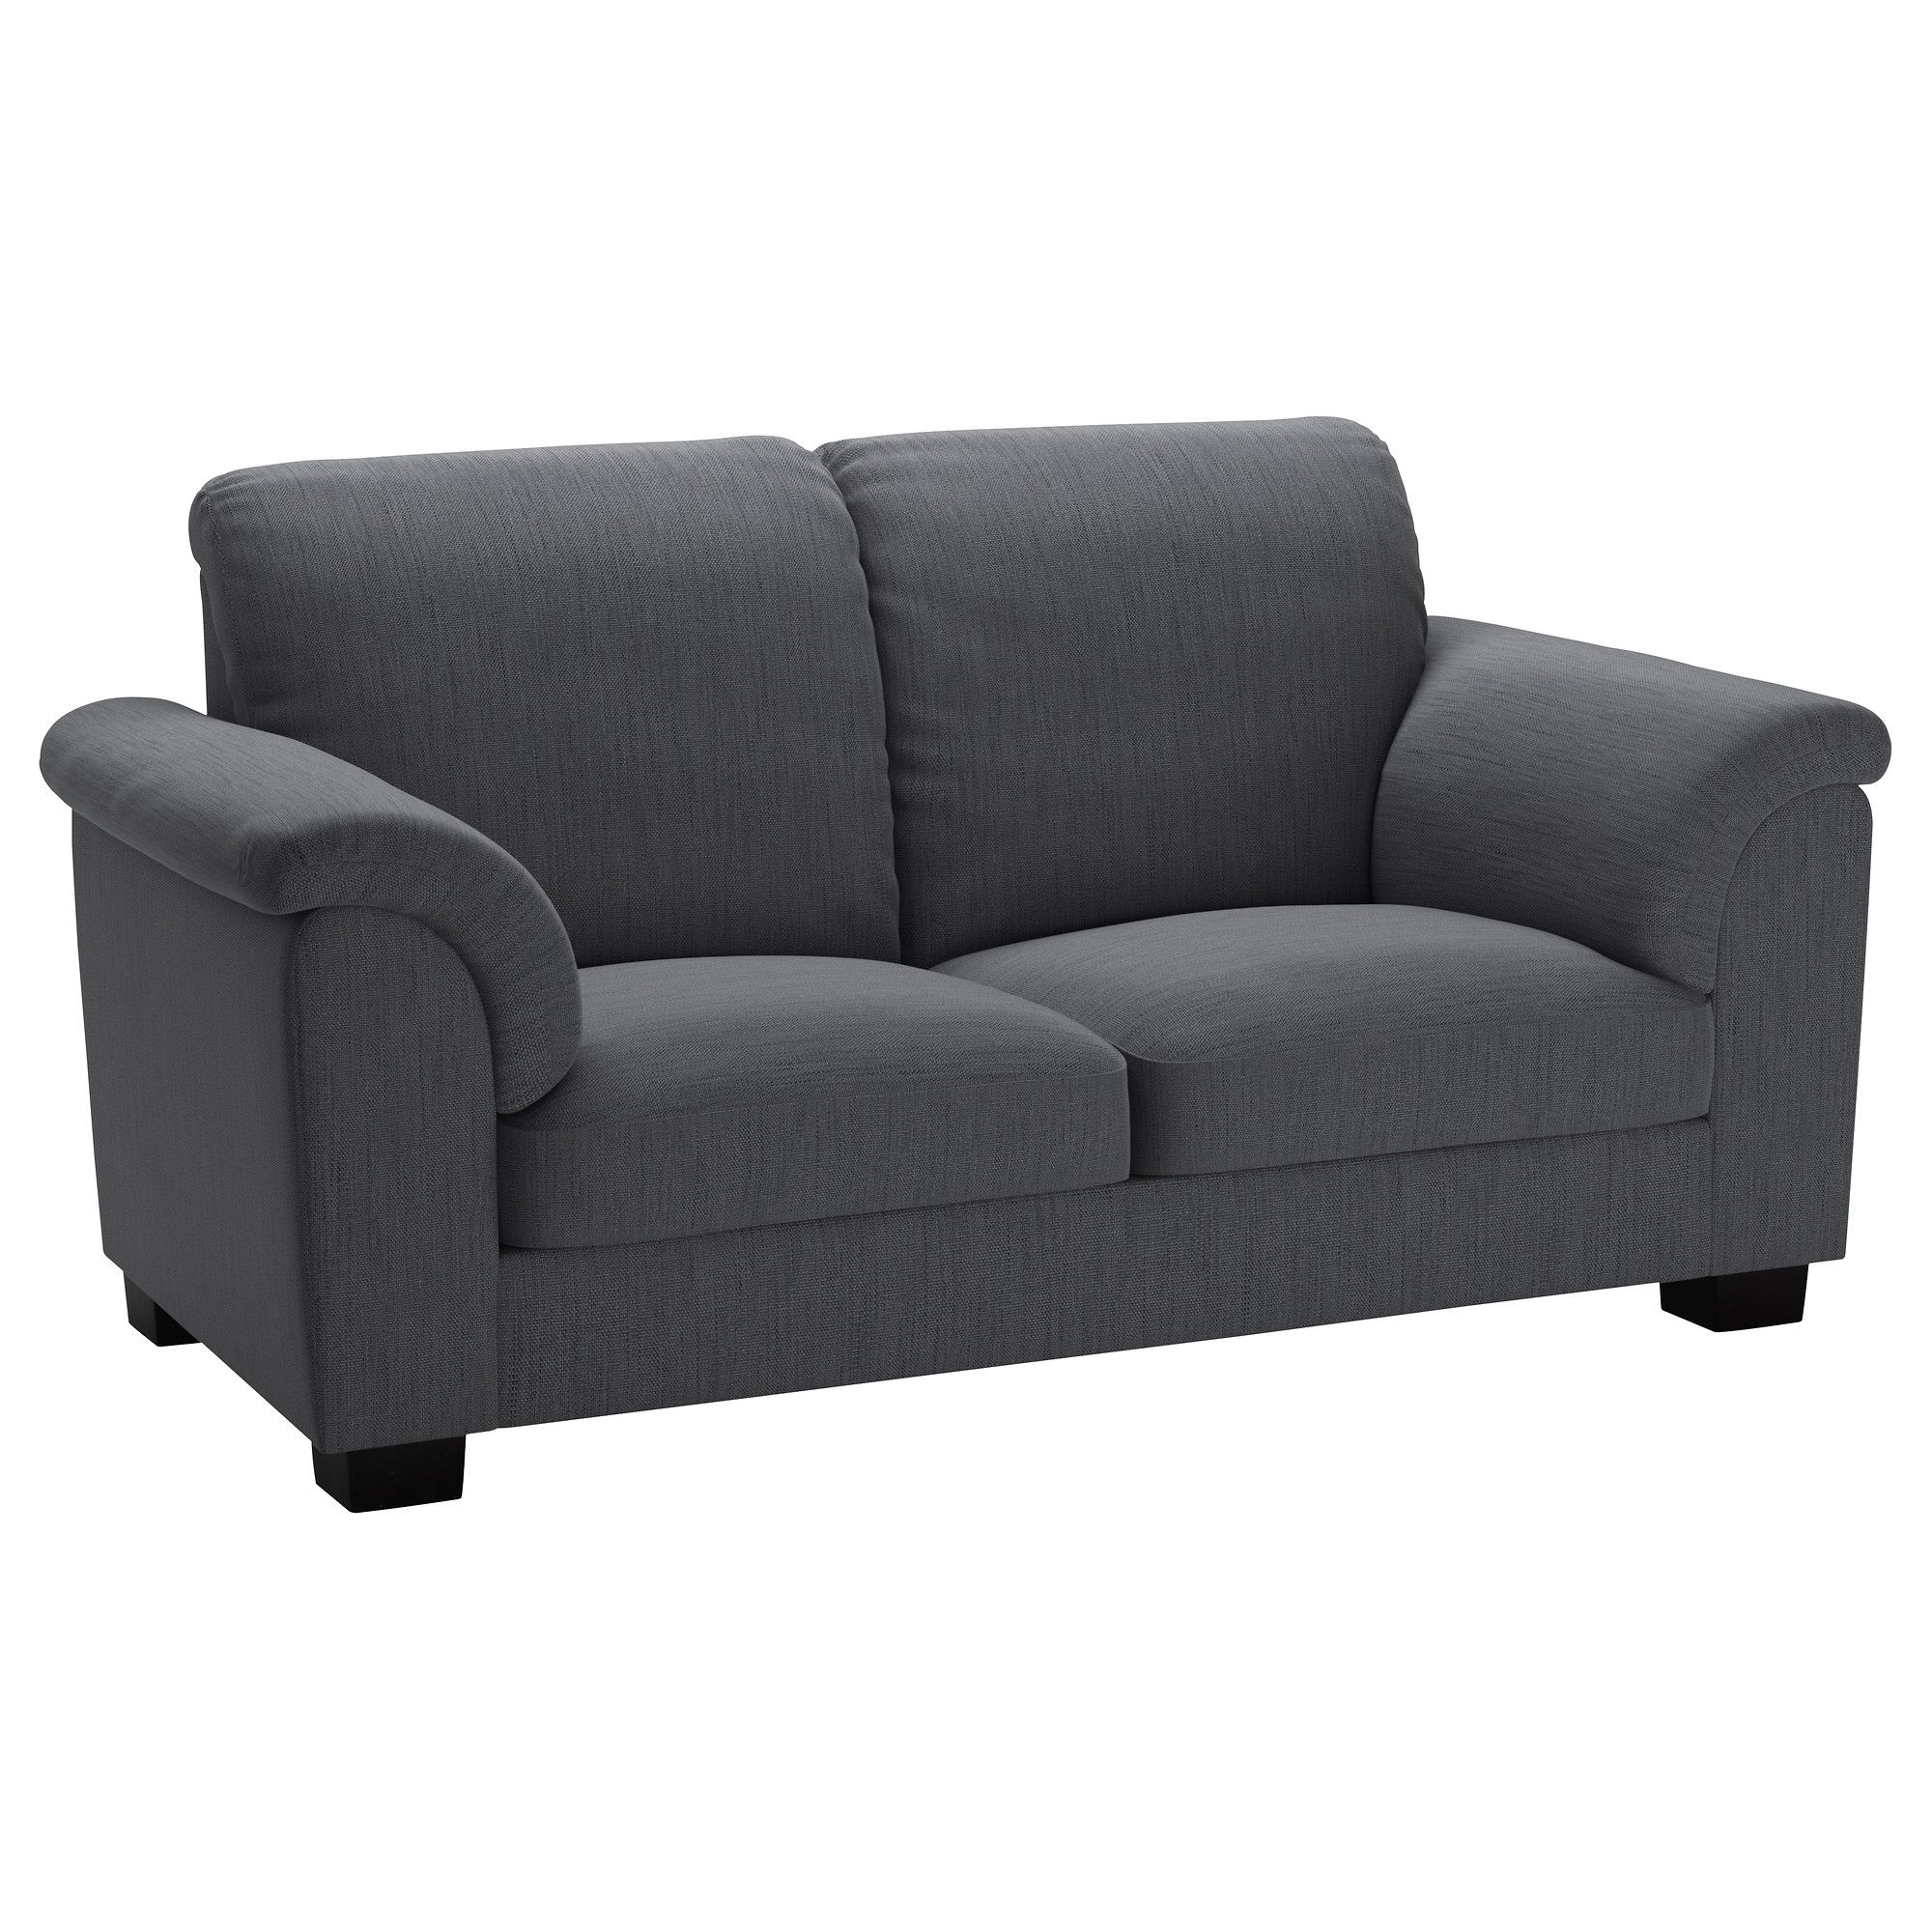 Ikea Two Seater Sofas For Current Tidafors Two Seat Sofa Hensta Grey – Ikea (View 4 of 15)